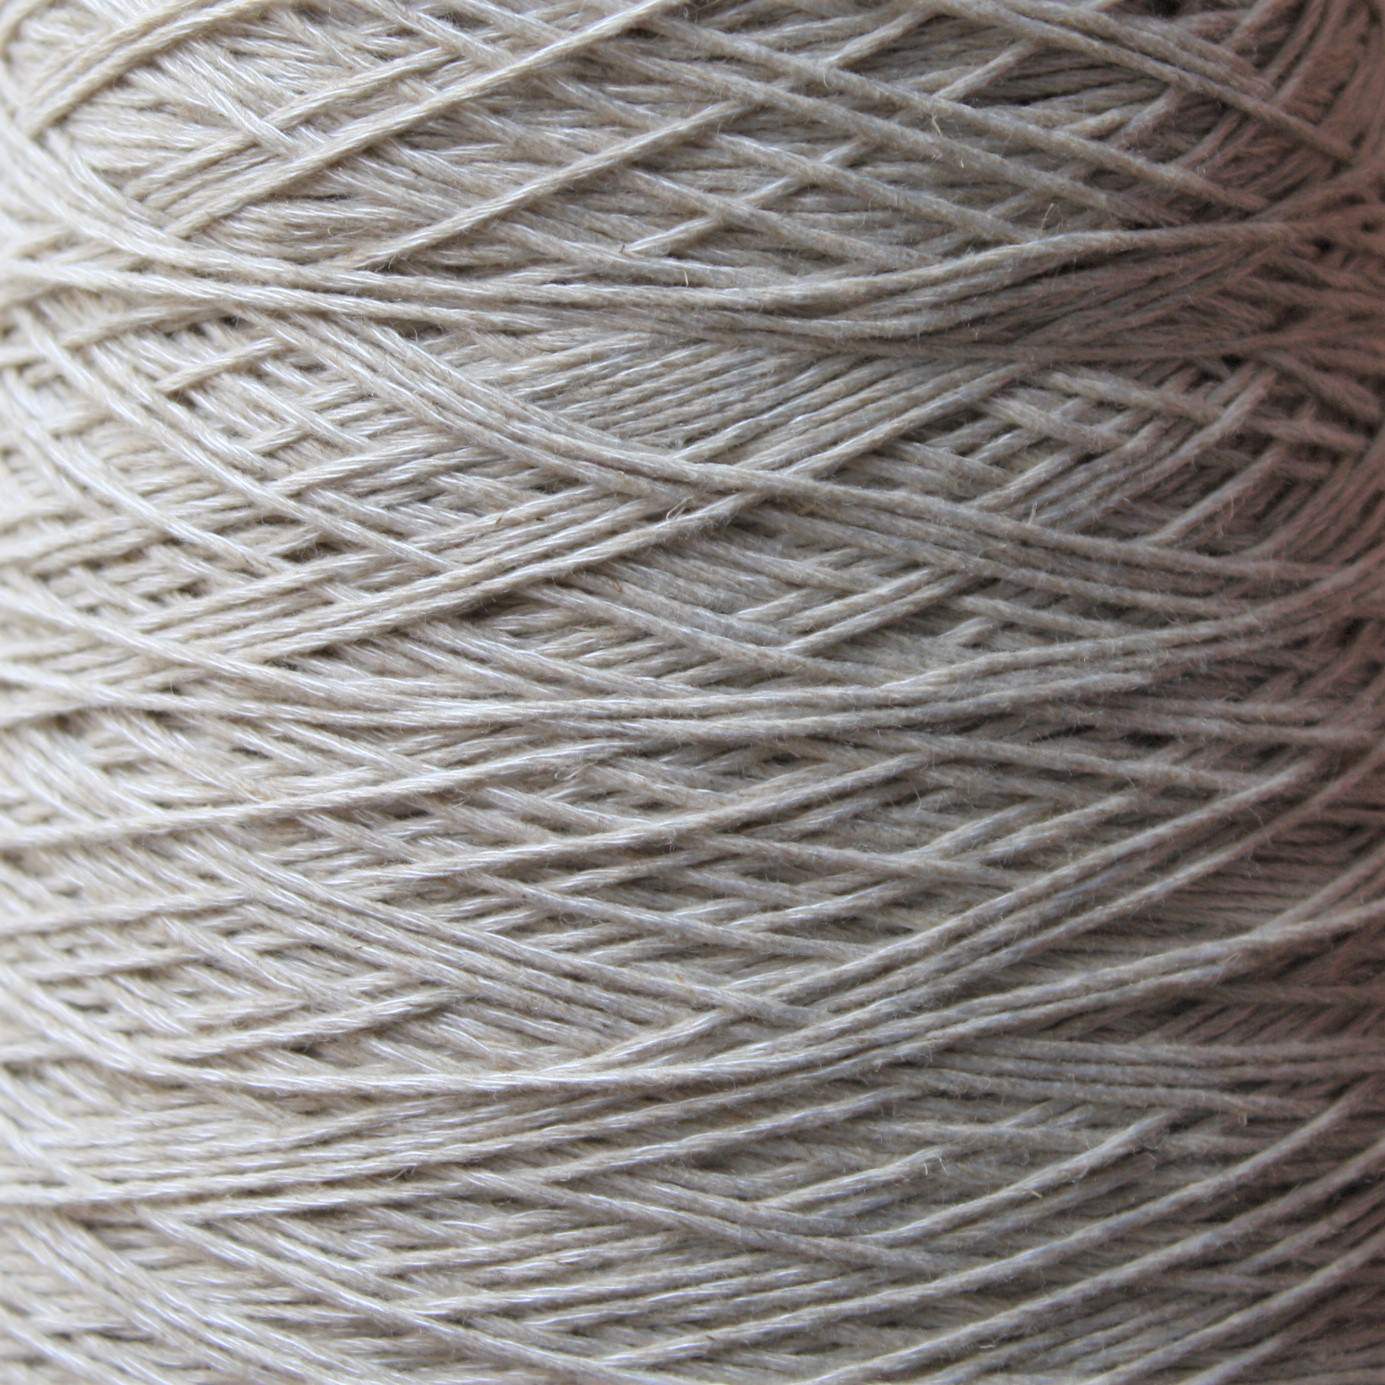 6 Tips for Working with Linen Yarn – Elizabeth Smith Knits